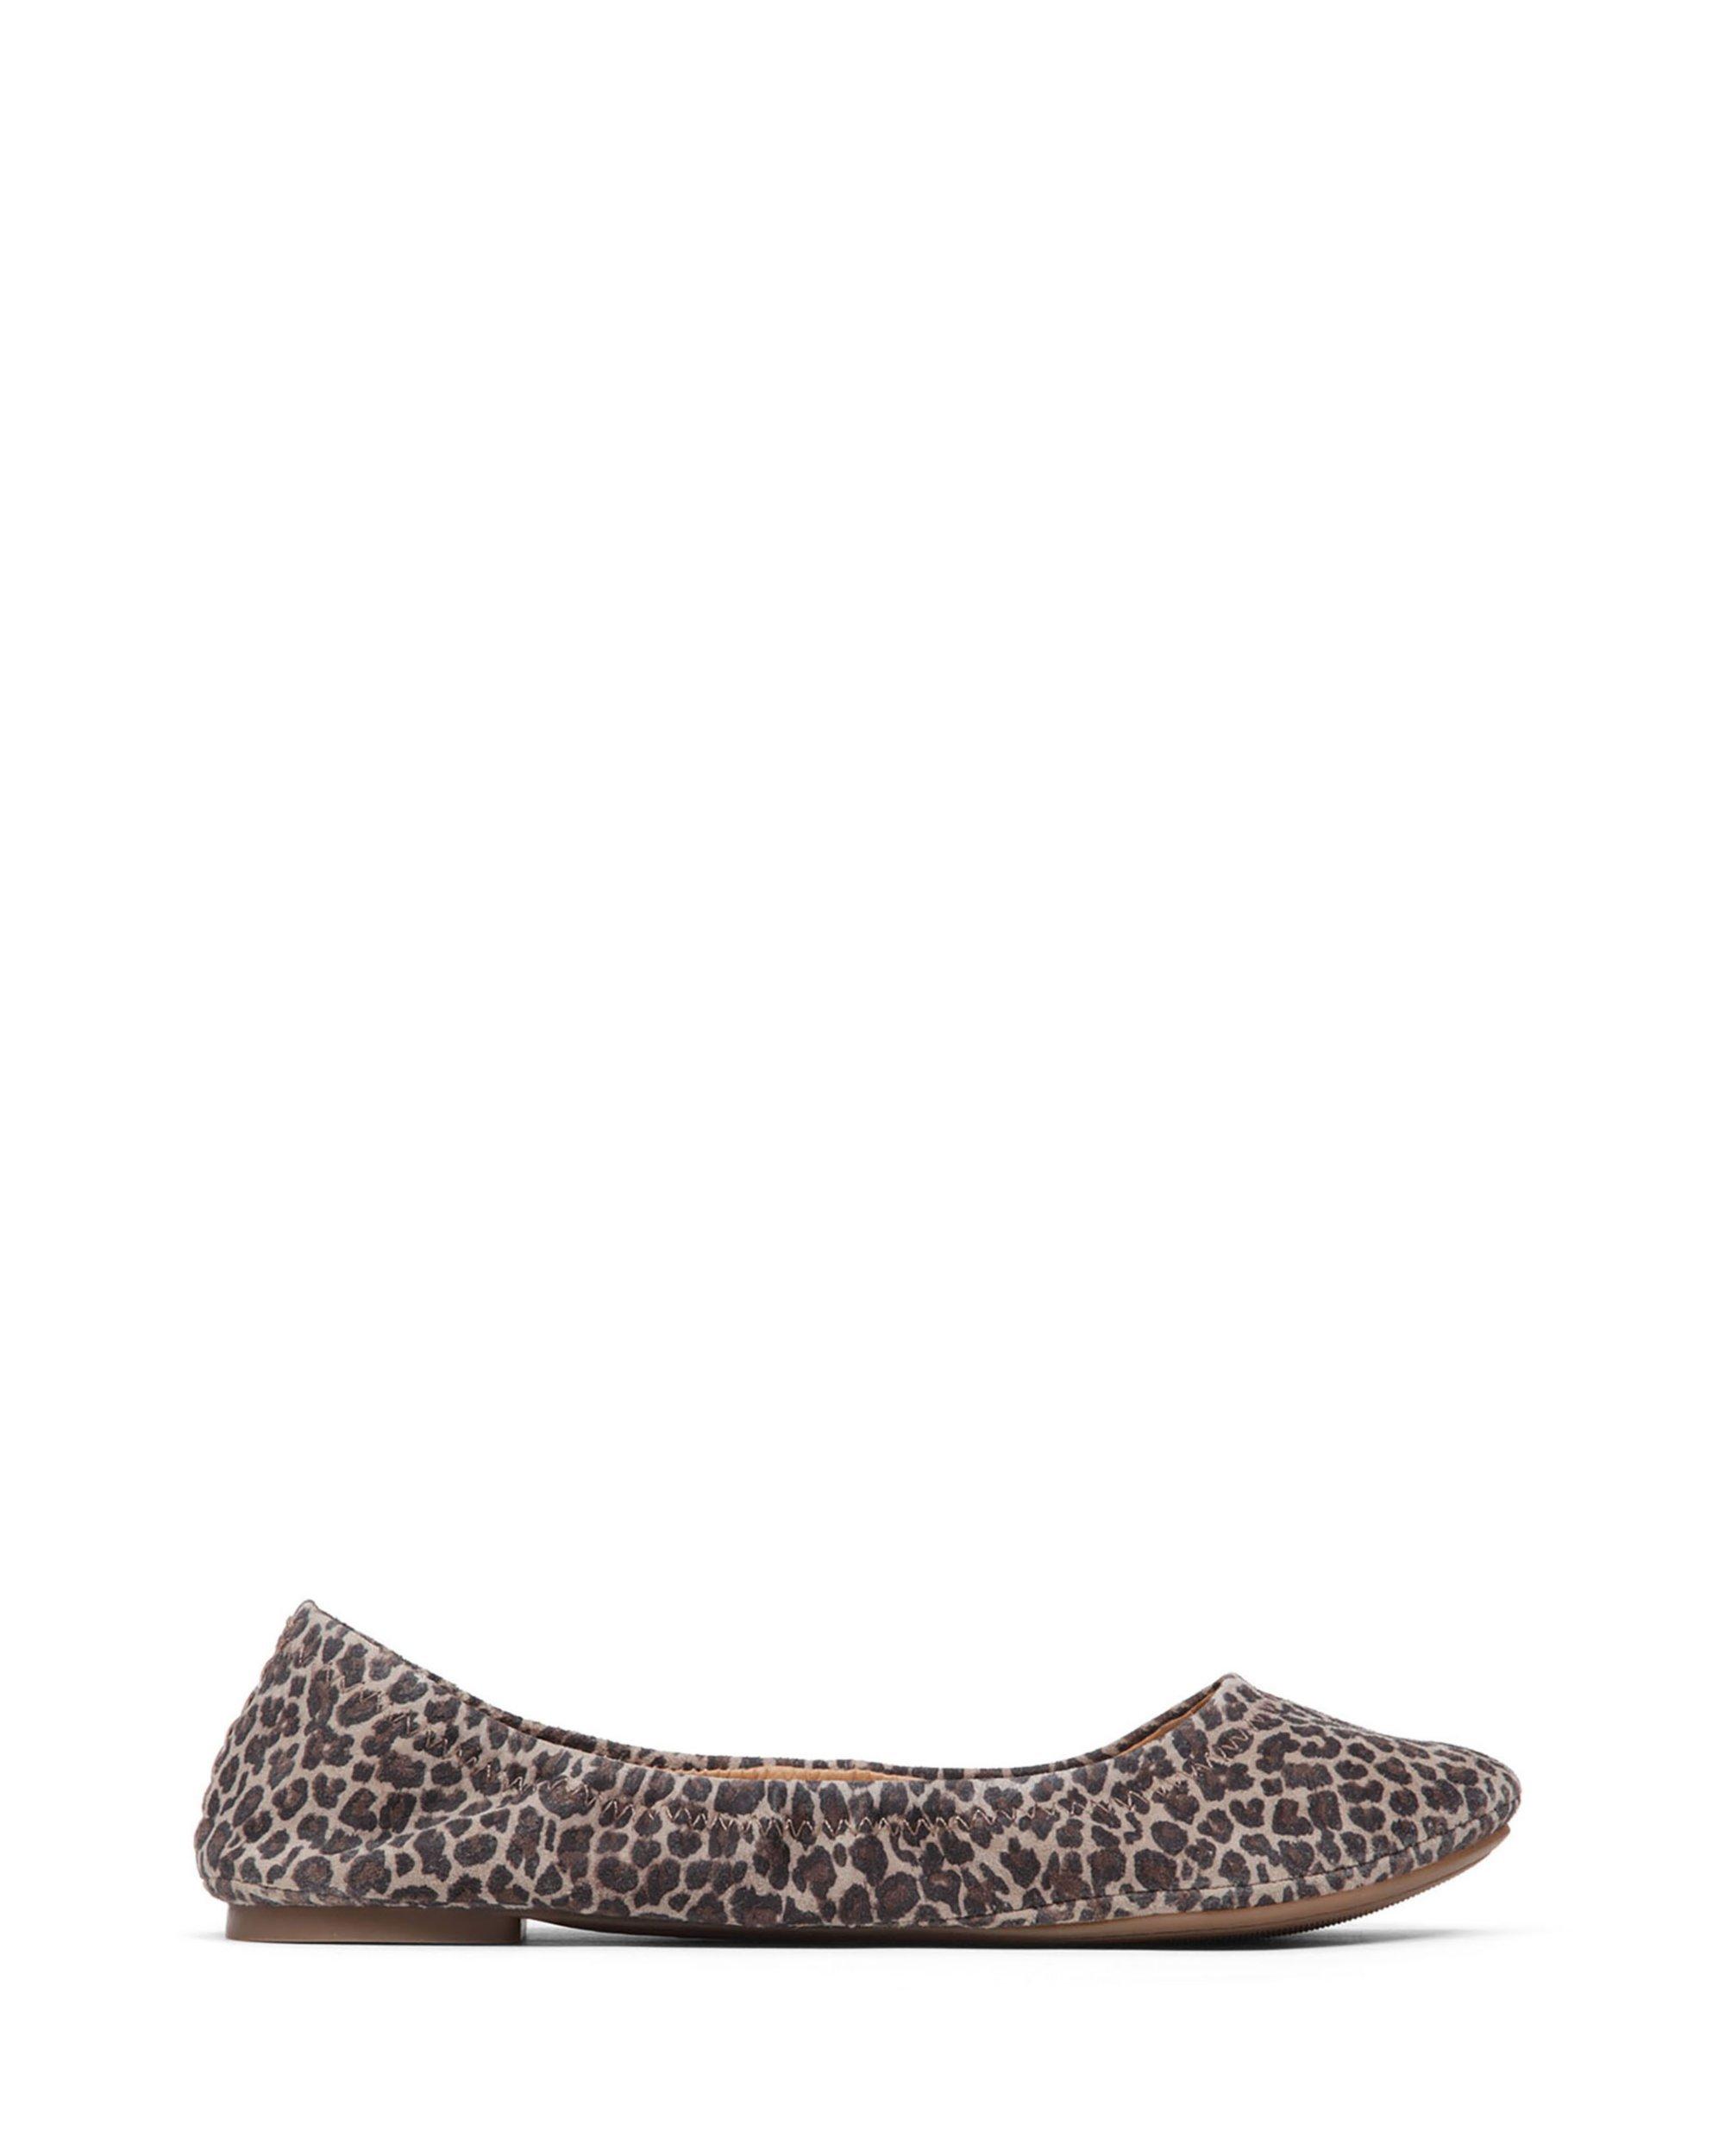 lucky brand emmie flats canada